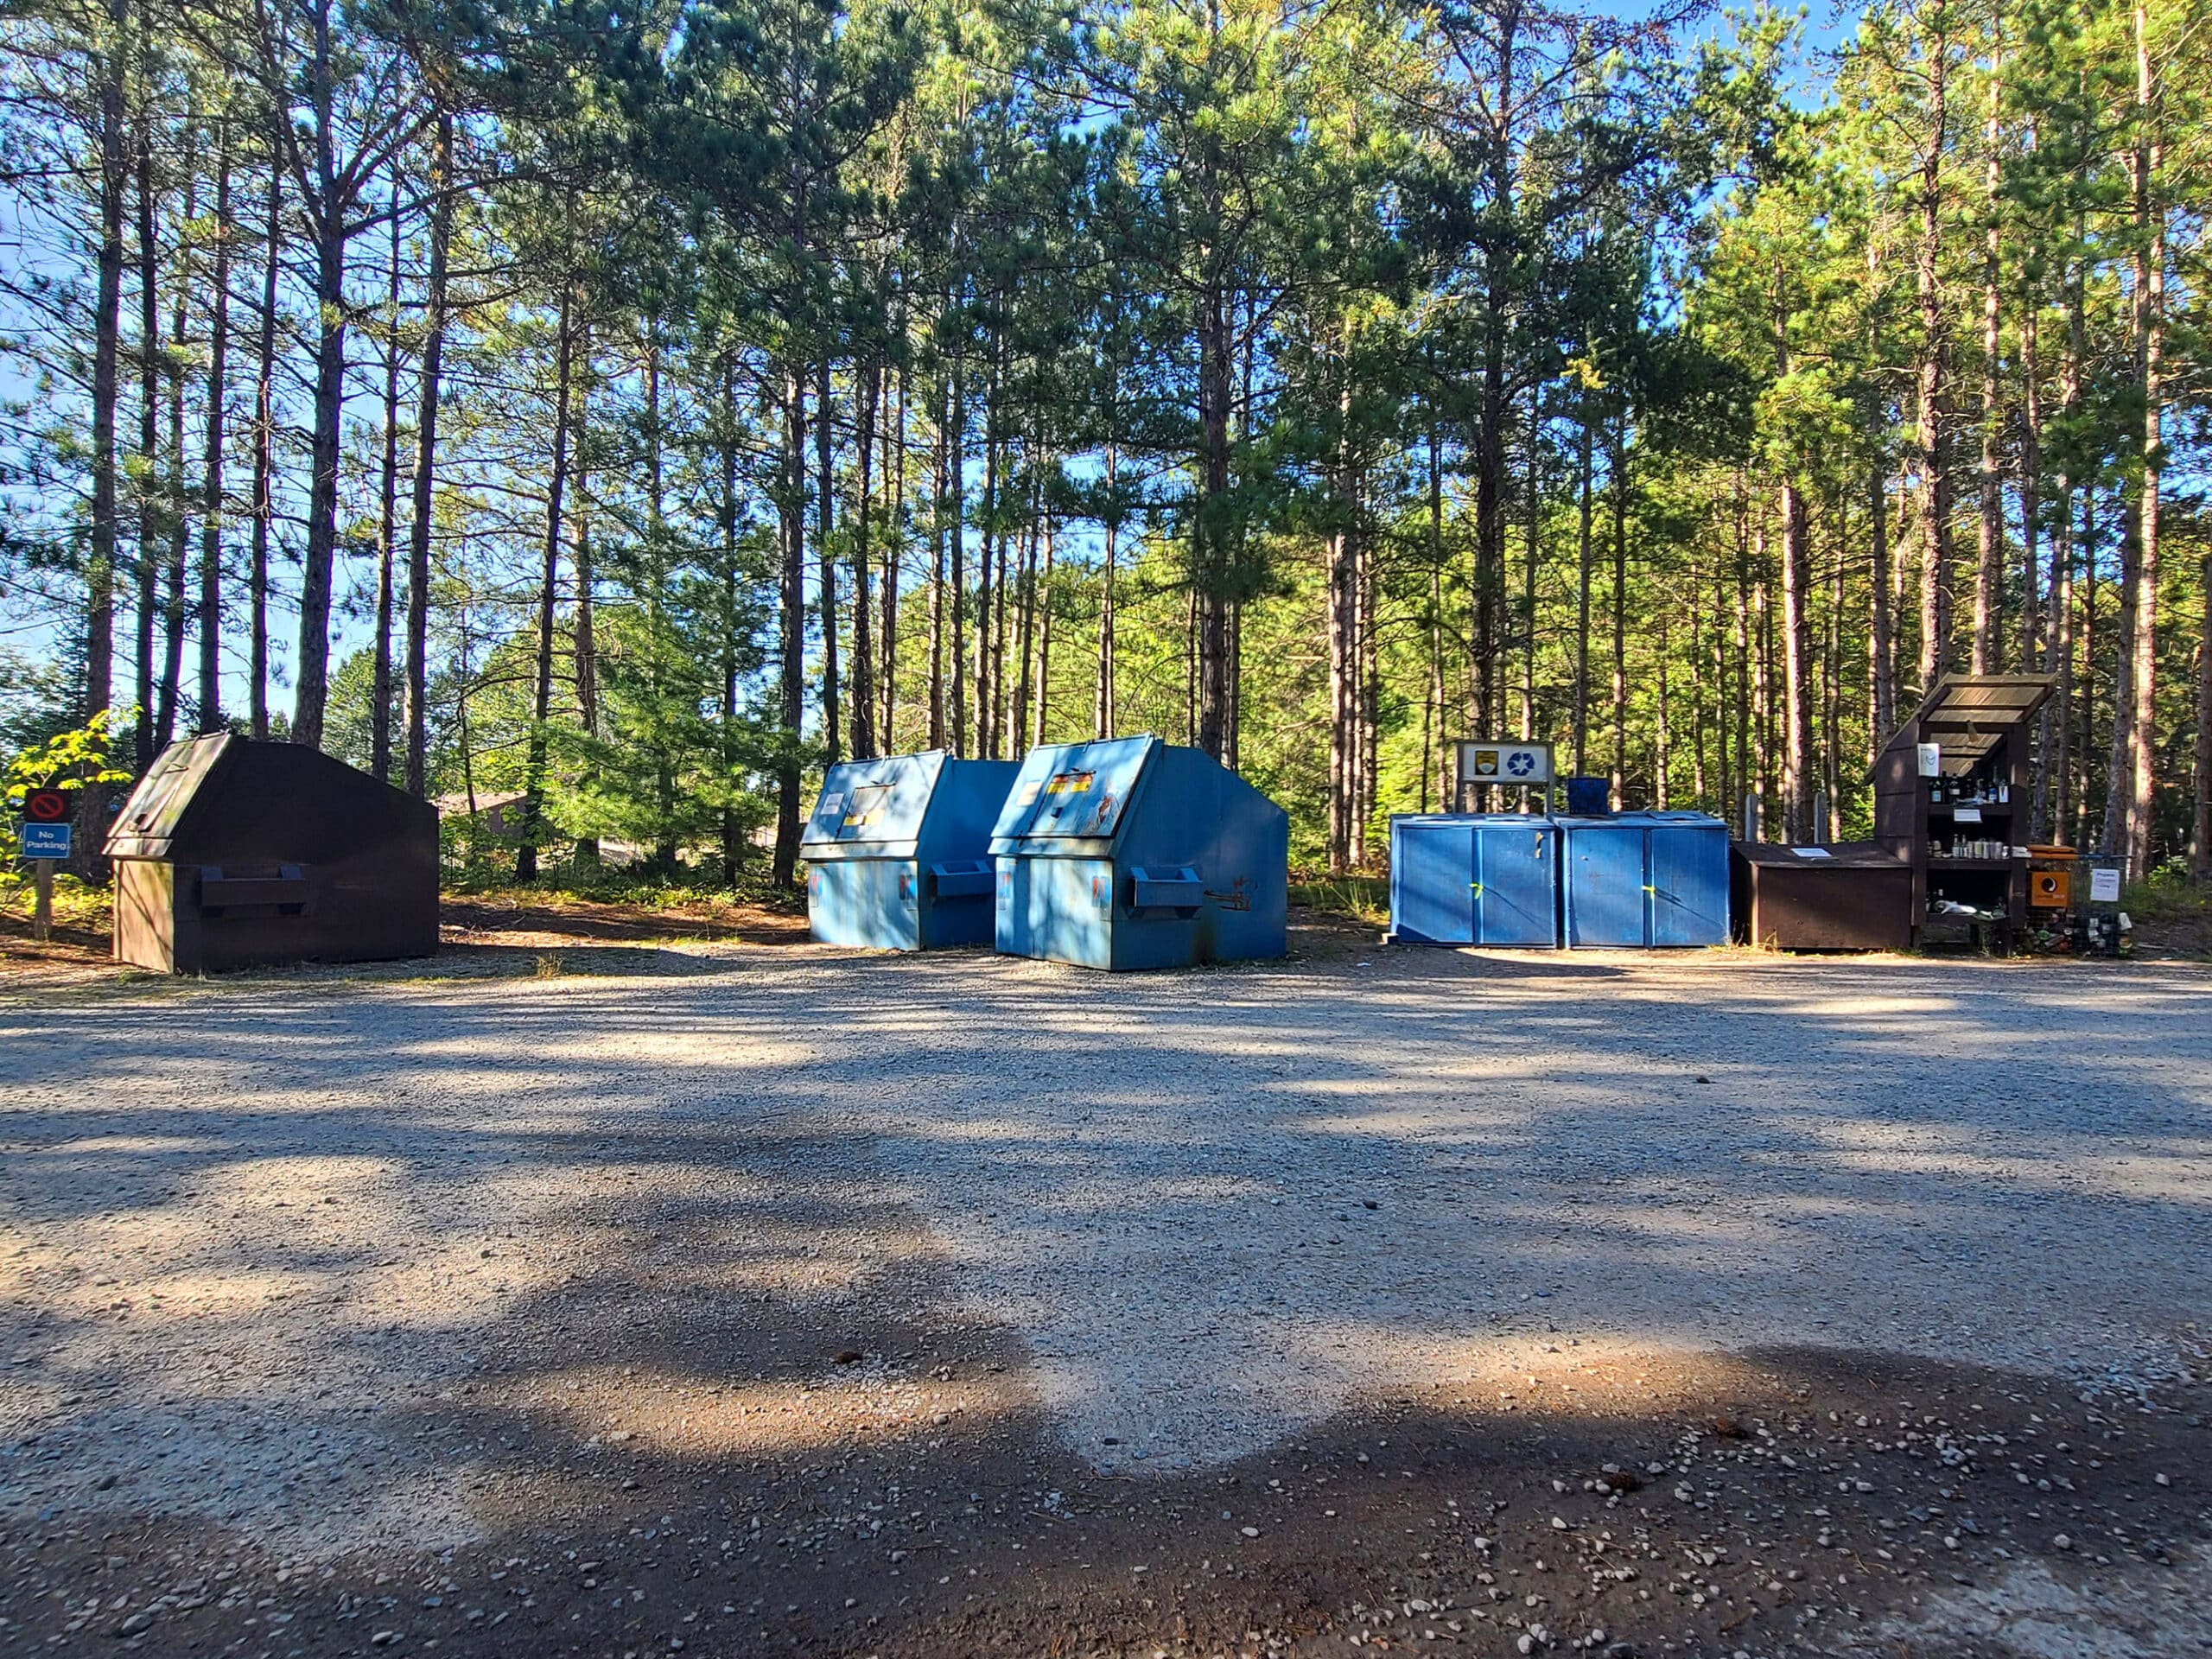 Several large campground garbage and recycling bins.